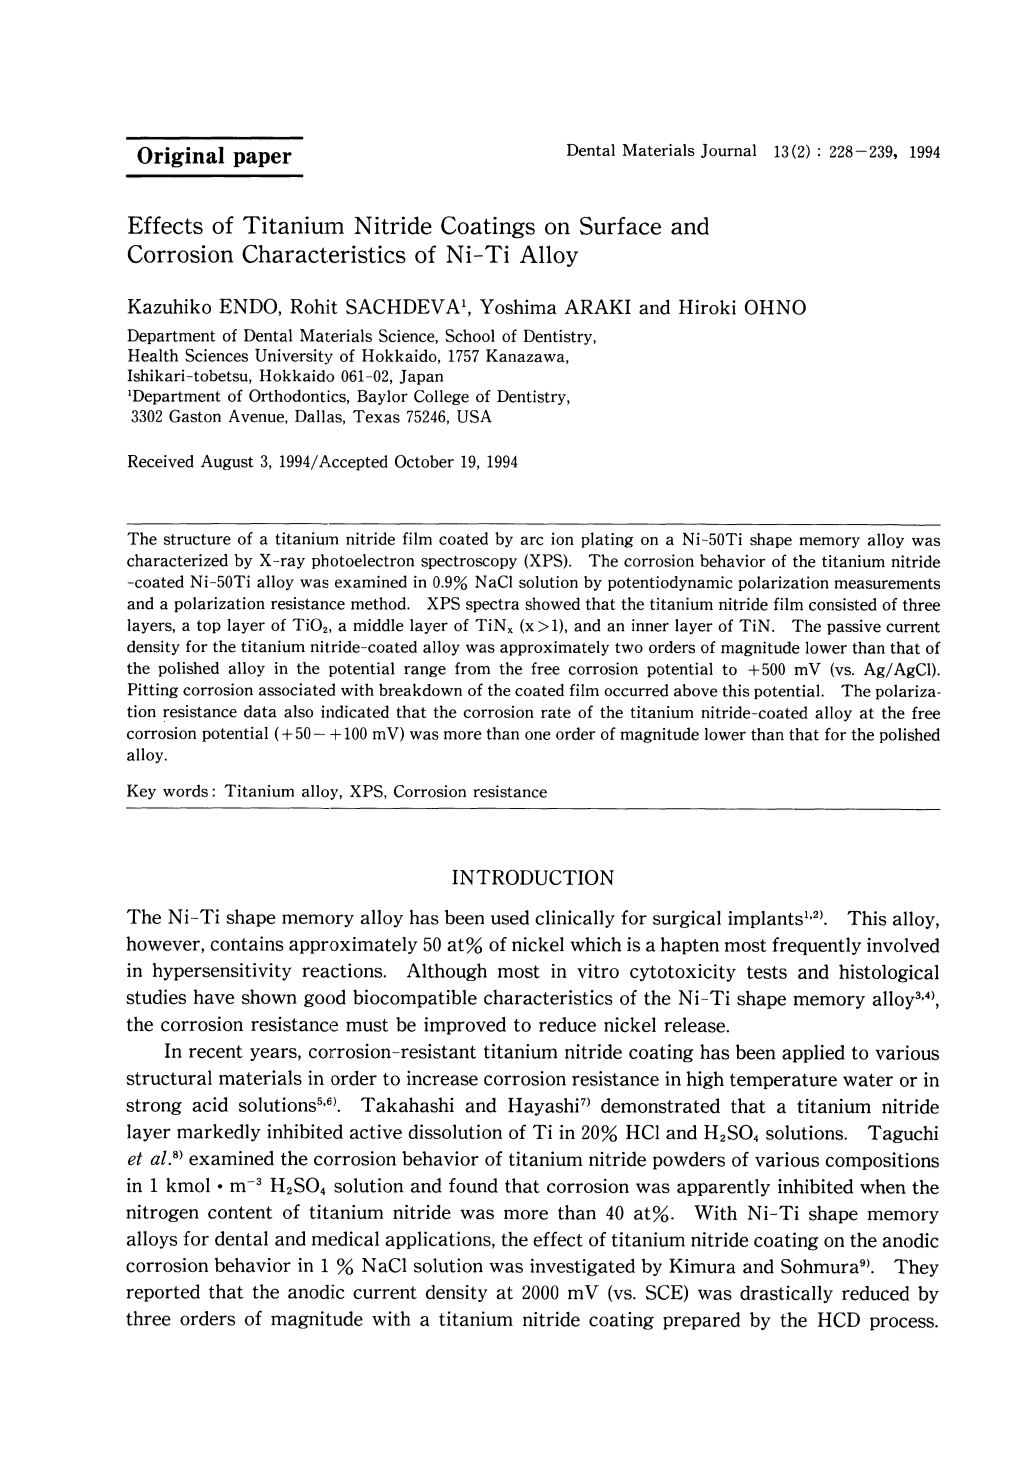 Effects of Titanium Nitride Coatings on Surface and Corrosion Characteristics of Ni-Ti Alloy